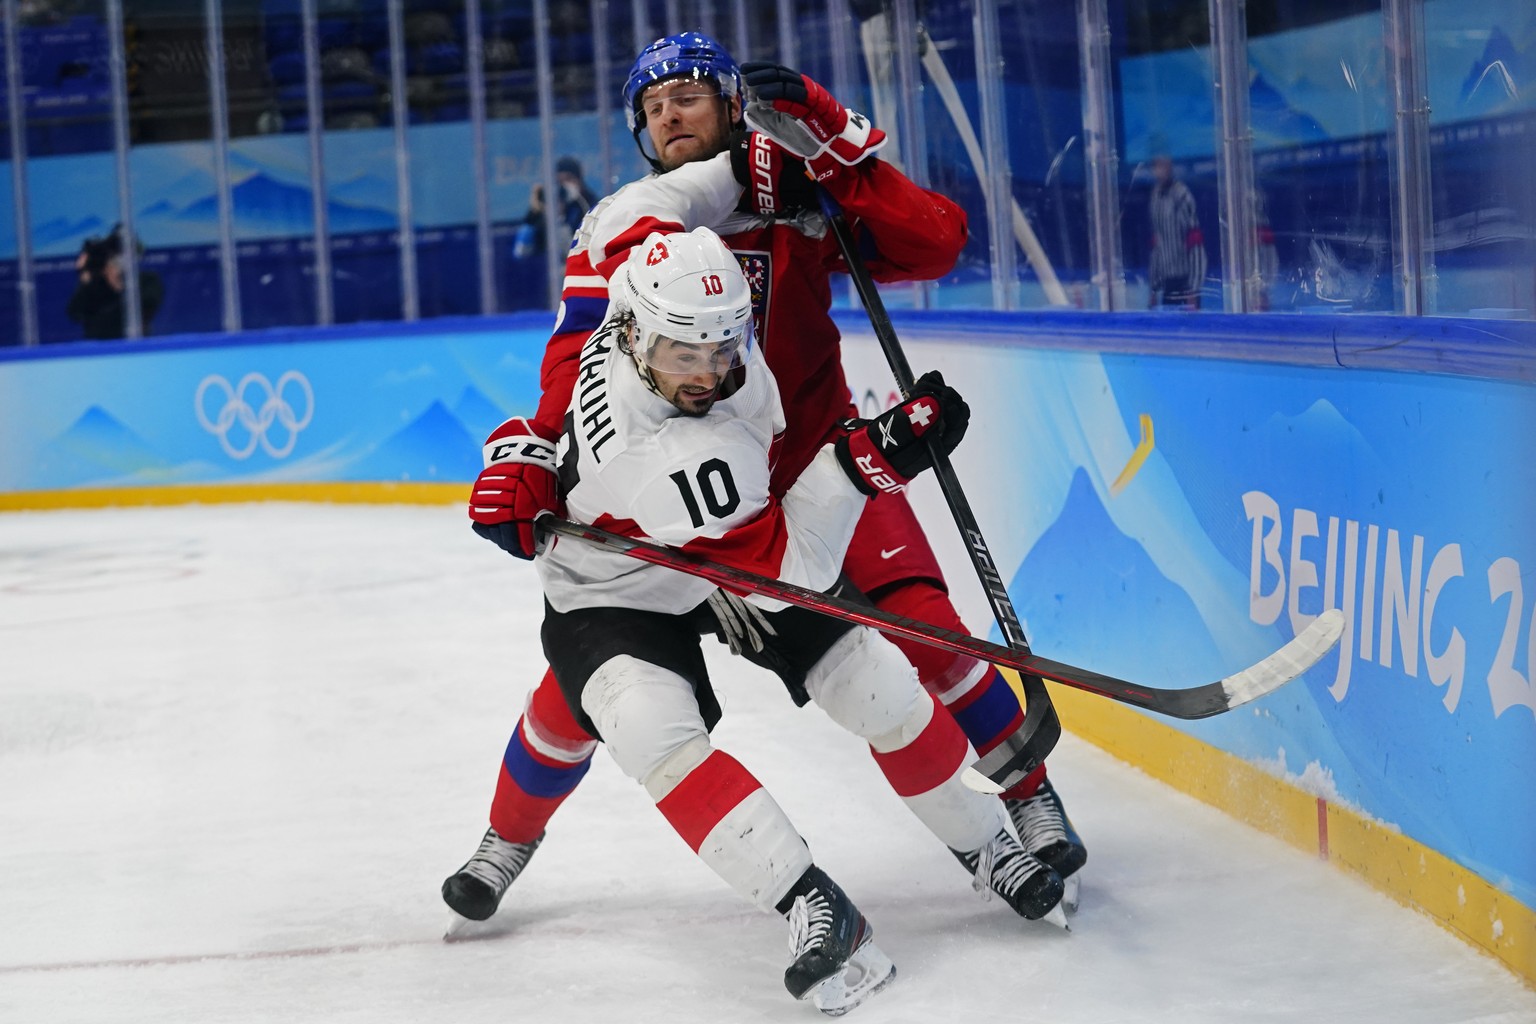 Switzerland&#039;s Andres Ambuhl (10) pushes back against Czech Republic&#039;s Jakub Jerabek during a preliminary round men&#039;s hockey game at the 2022 Winter Olympics, Friday, Feb. 11, 2022, in B ...